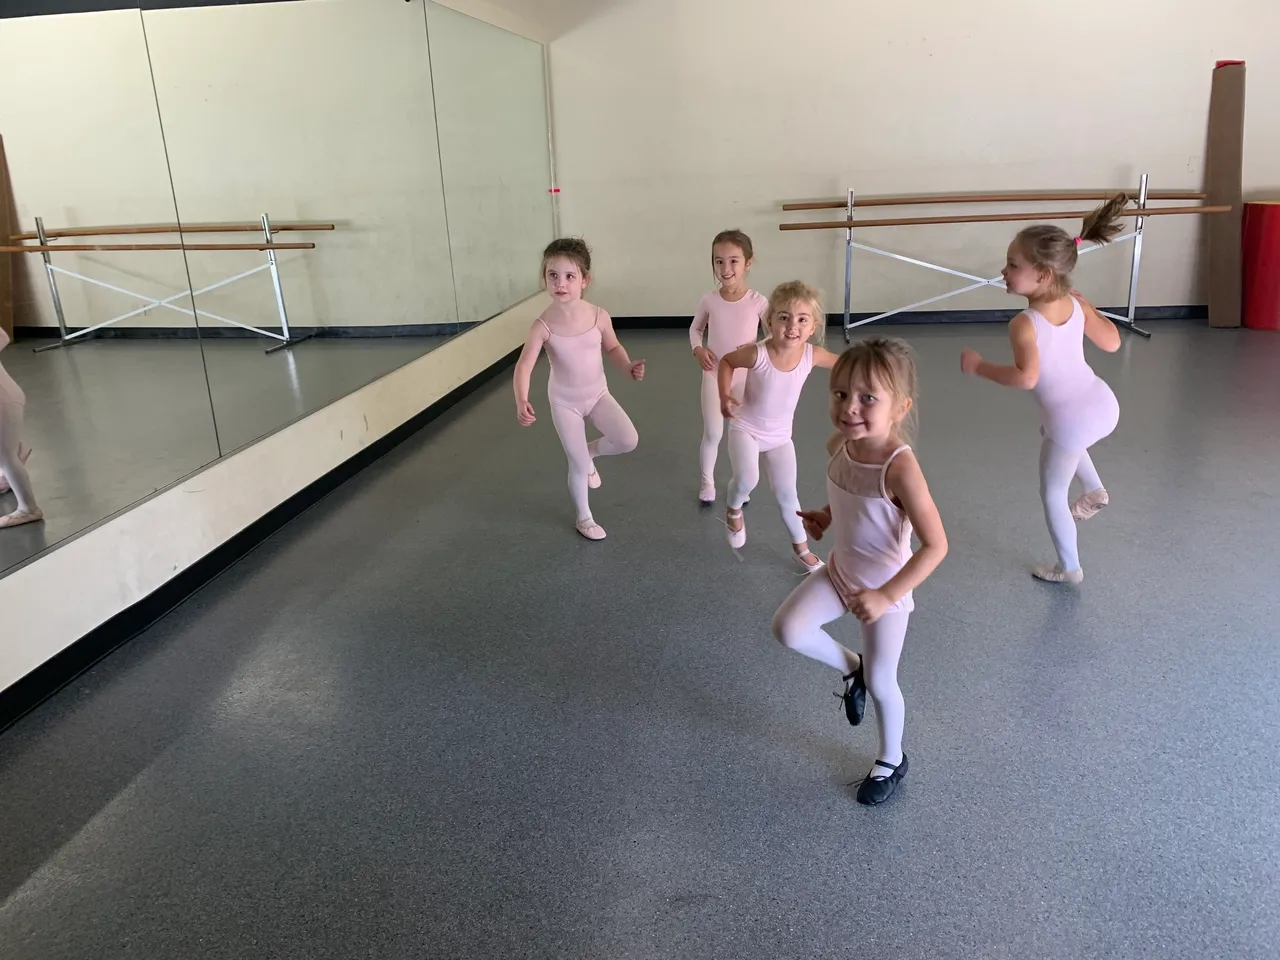 A group of young children in white outfits practicing ballet.